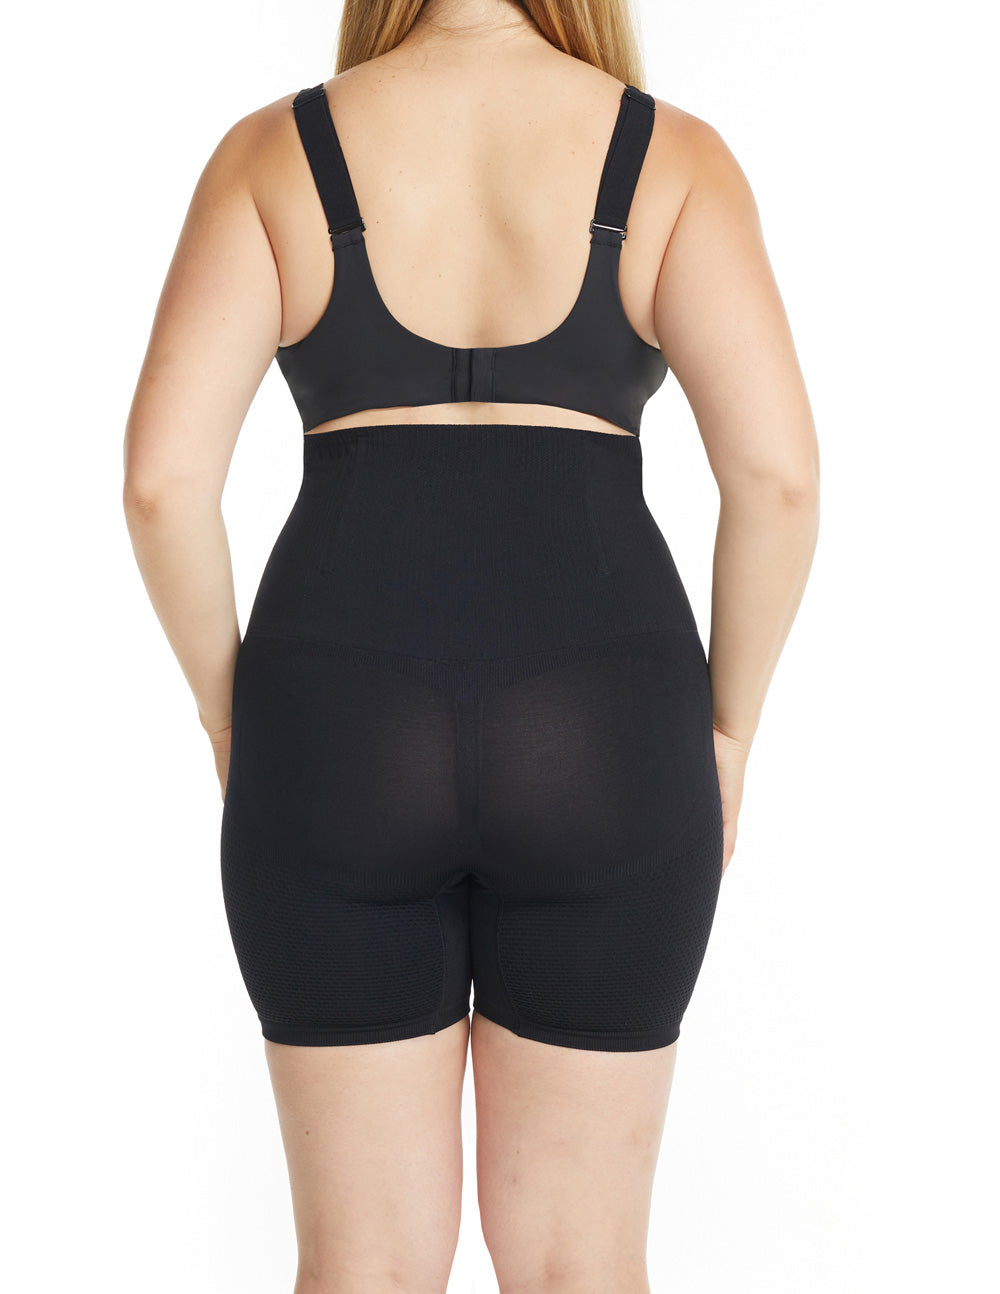 Black plus size control top shapewear shorts for chafing